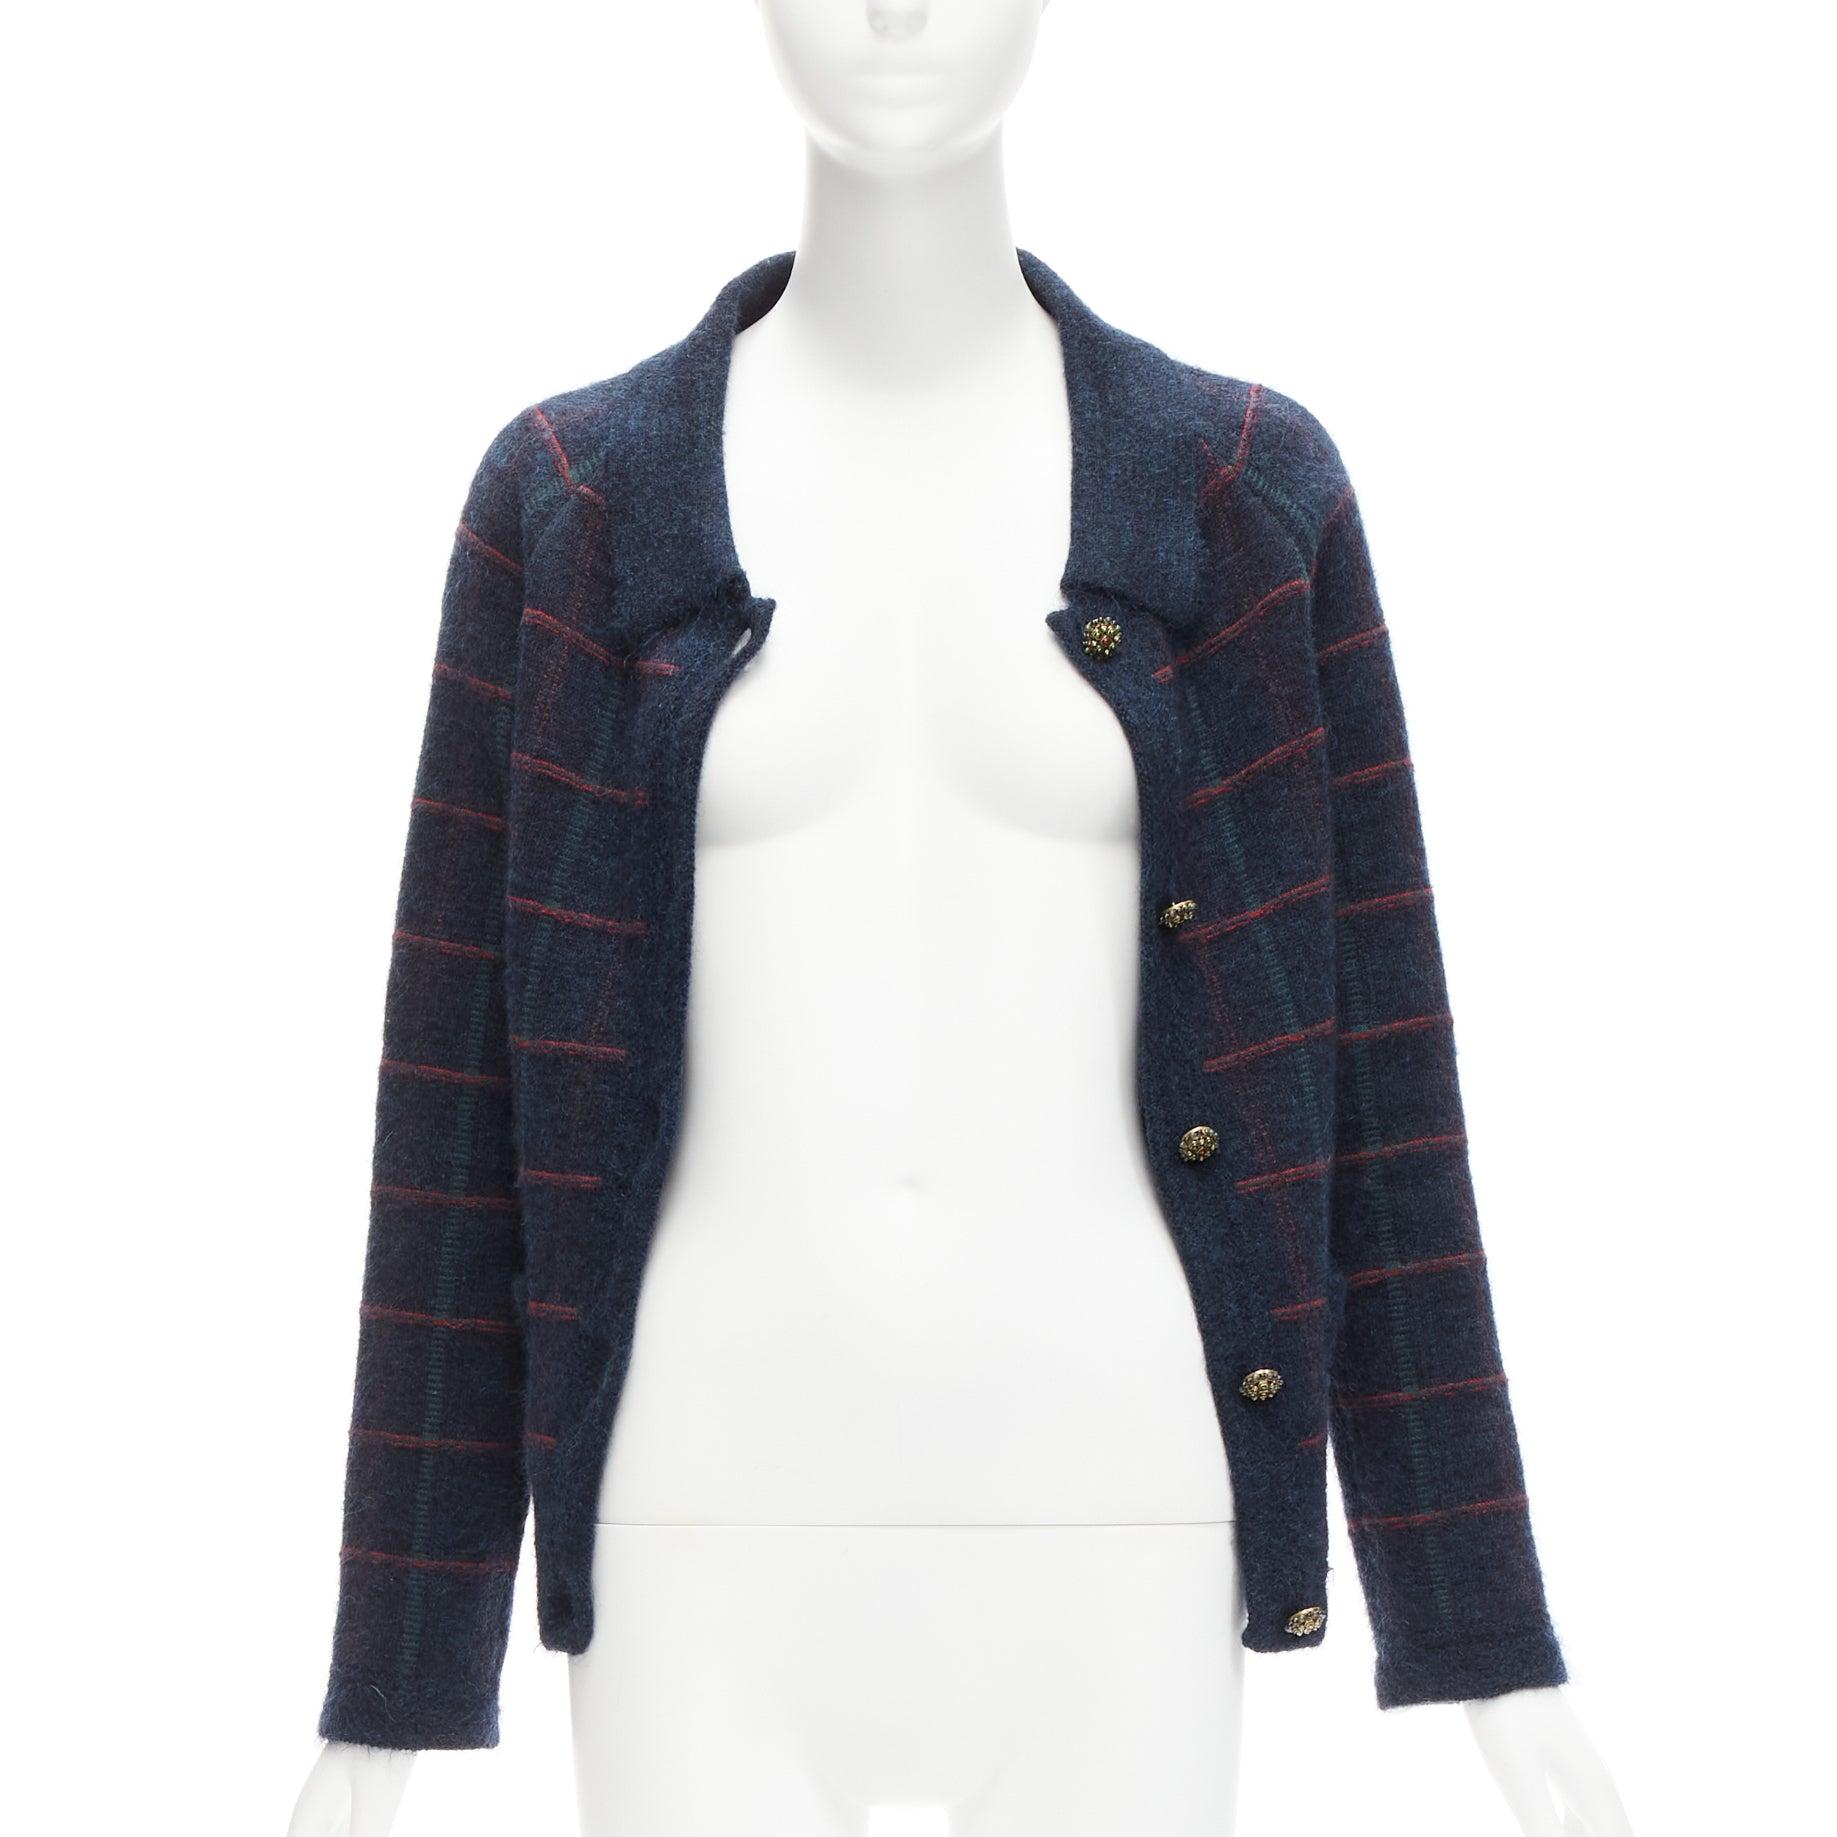 CHANEL 13A Edinburgh green plaid cashmere mohair boucle gripoix buttons jacket FR36 S
Reference: TGAS/D00926
Brand: Chanel
Designer: Karl Lagerfeld
Collection: 14A Edinburgh
Material: Wool, Cashmere, Mohair
Color: Green, Red
Pattern: Plaid
Closure: